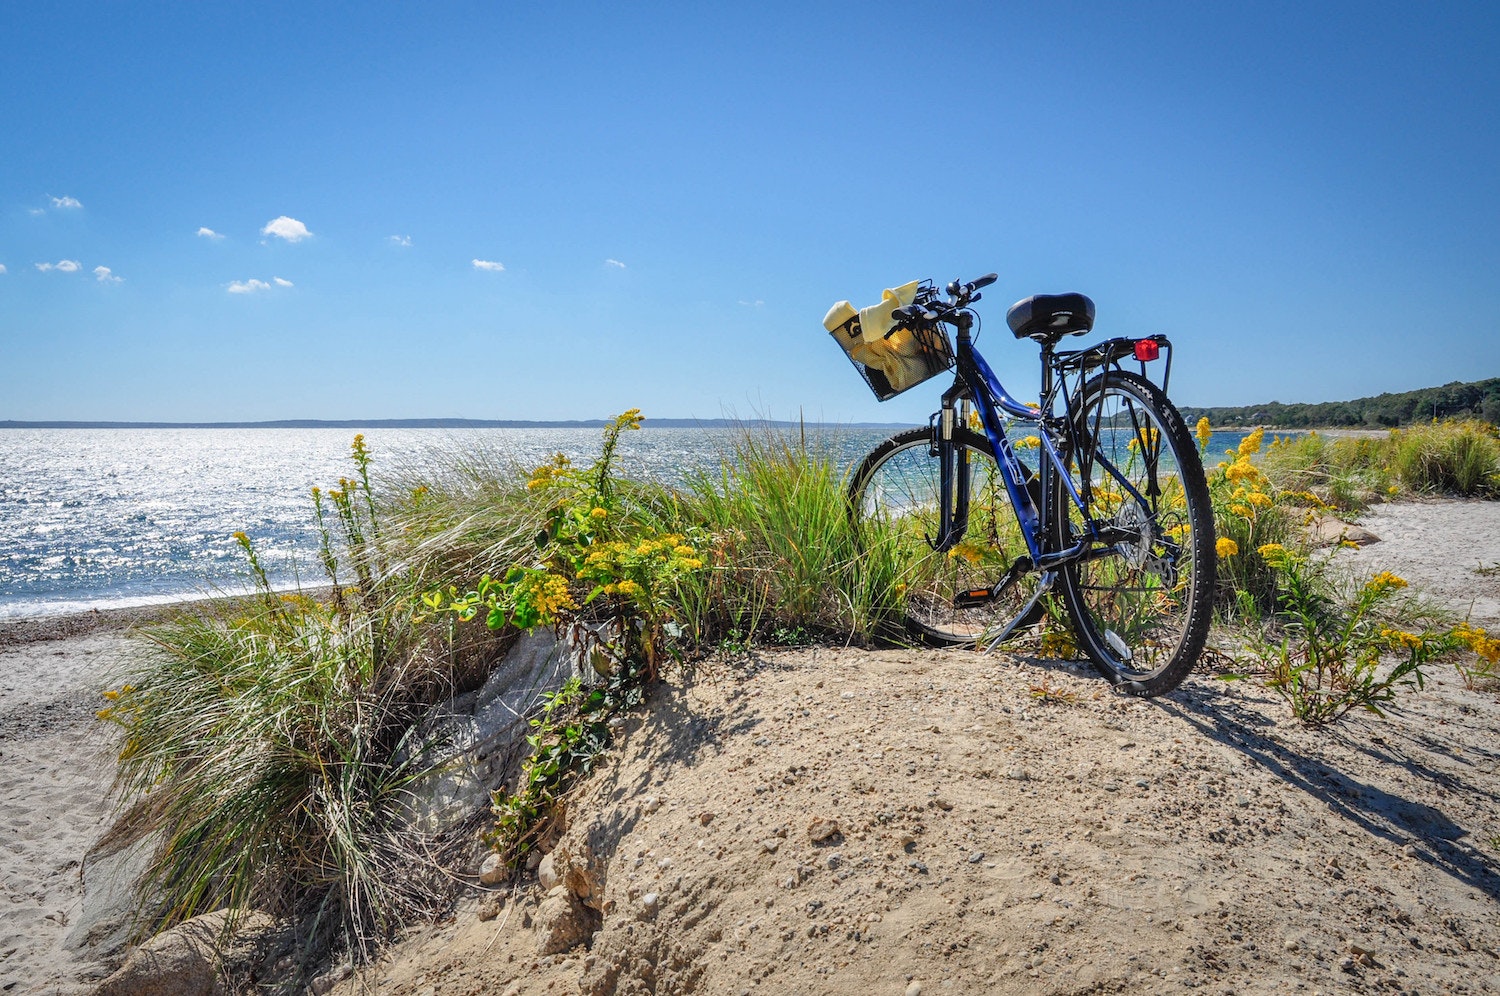 A bicycle parked in dunes by the beach, Cape Cod, Massachusetts, USA